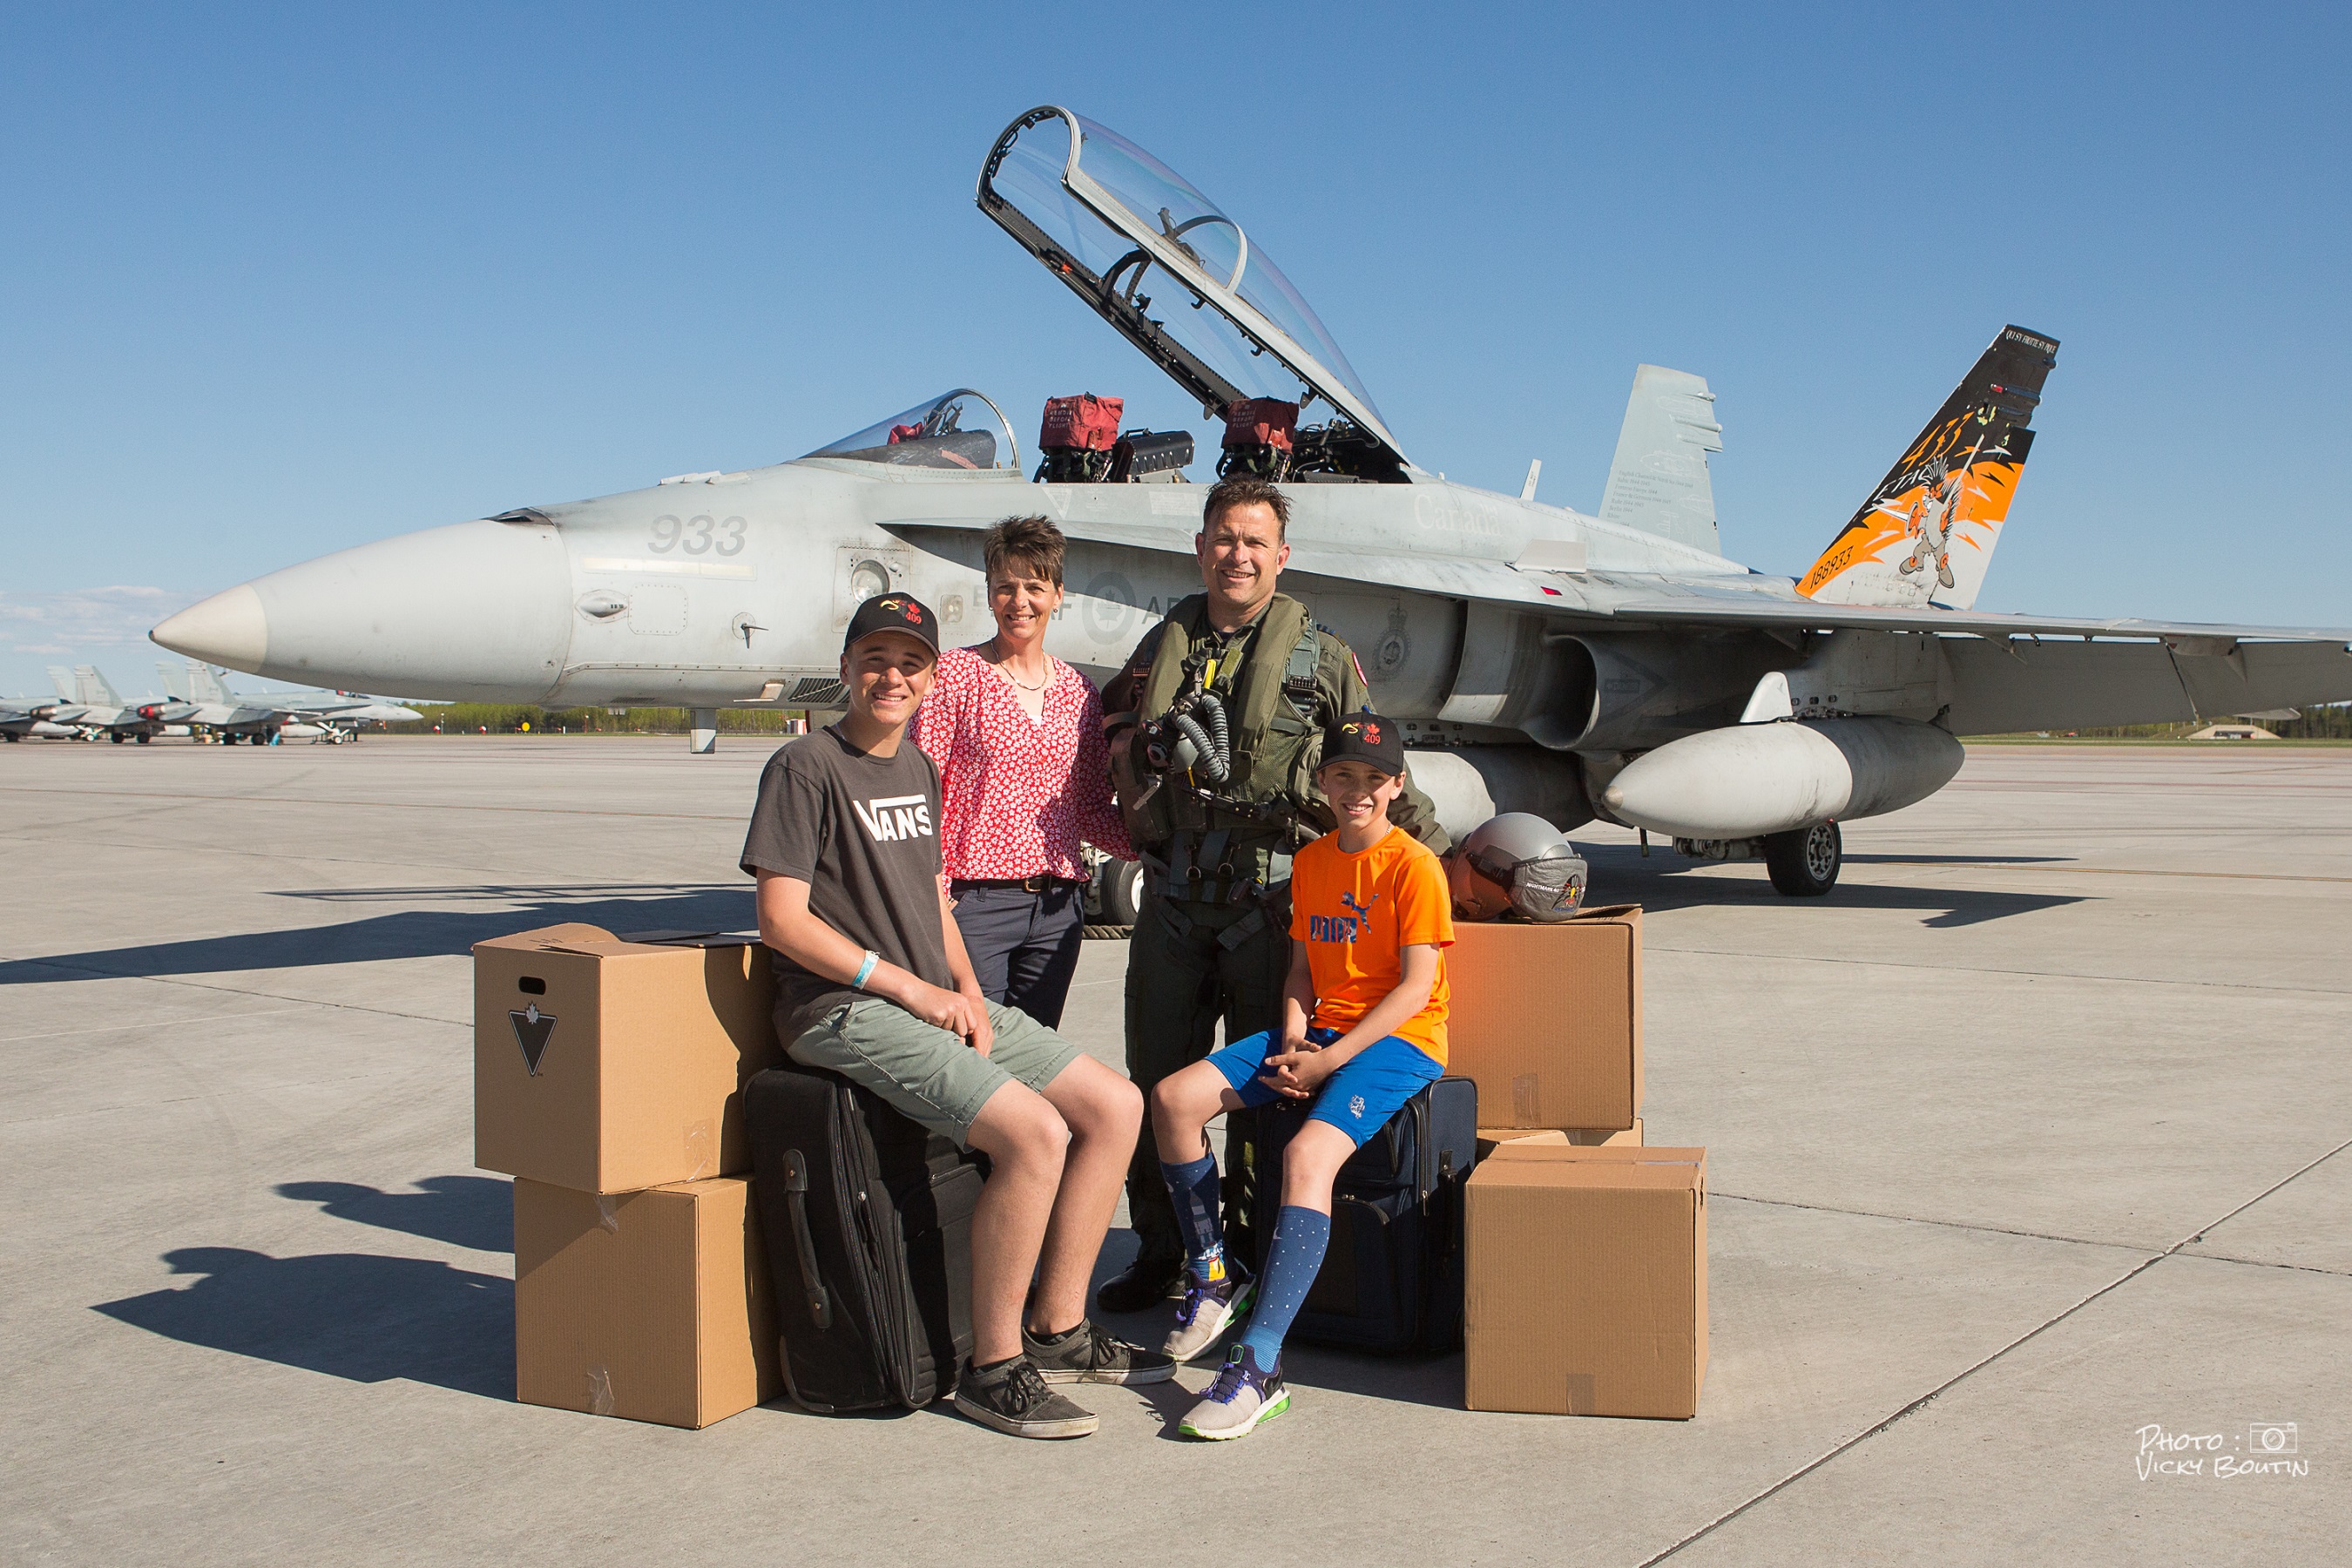 Two adults standing, one wearing a military flight suit, and two children sitting on luggage among cardboard boxes. Behind them is a grey jet fighter with its canopy open. 